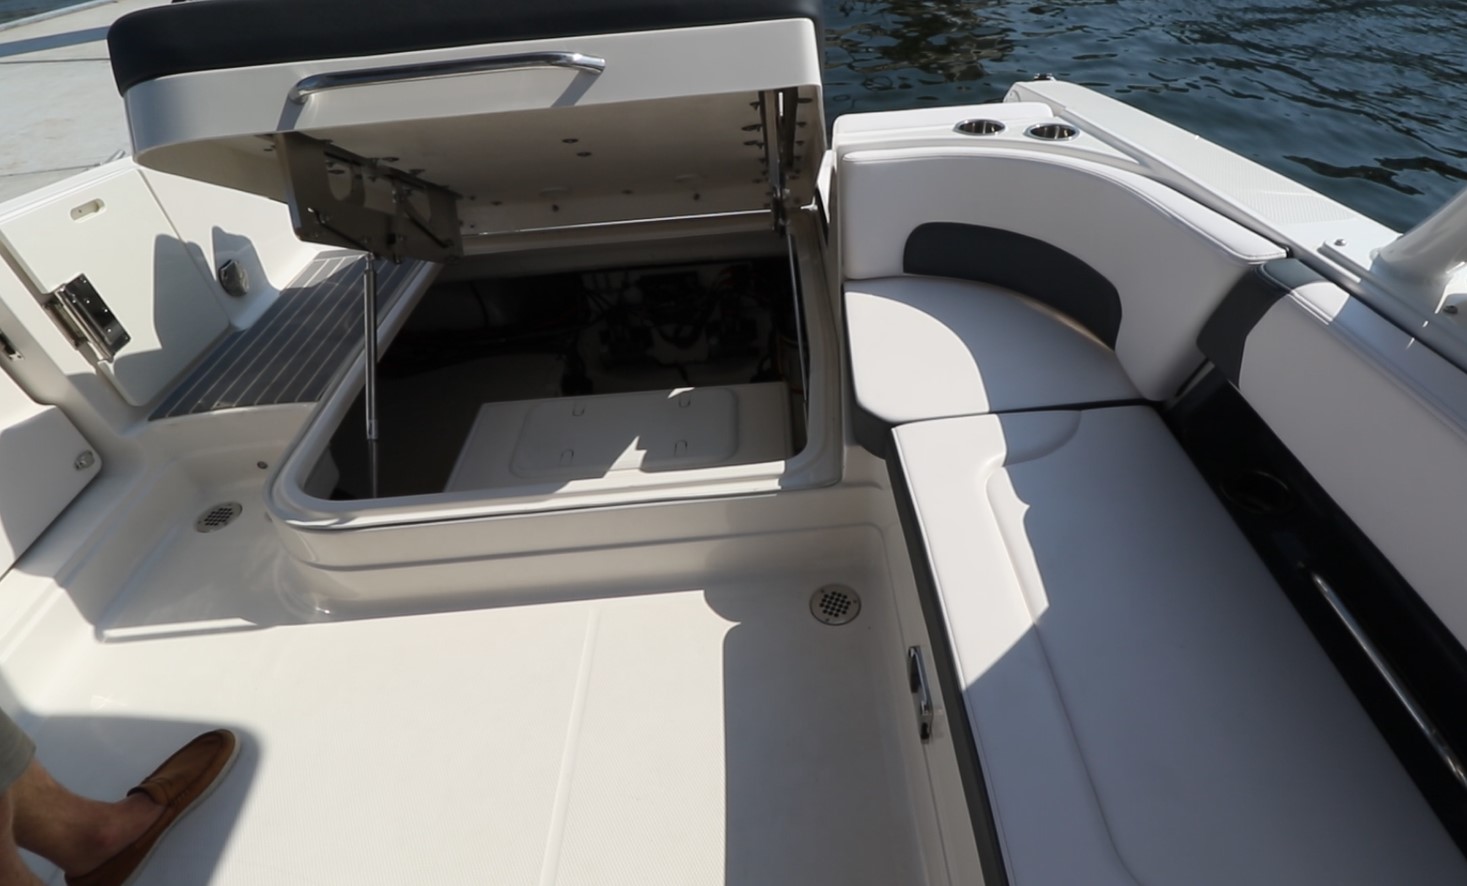 Boat mechanical compartment